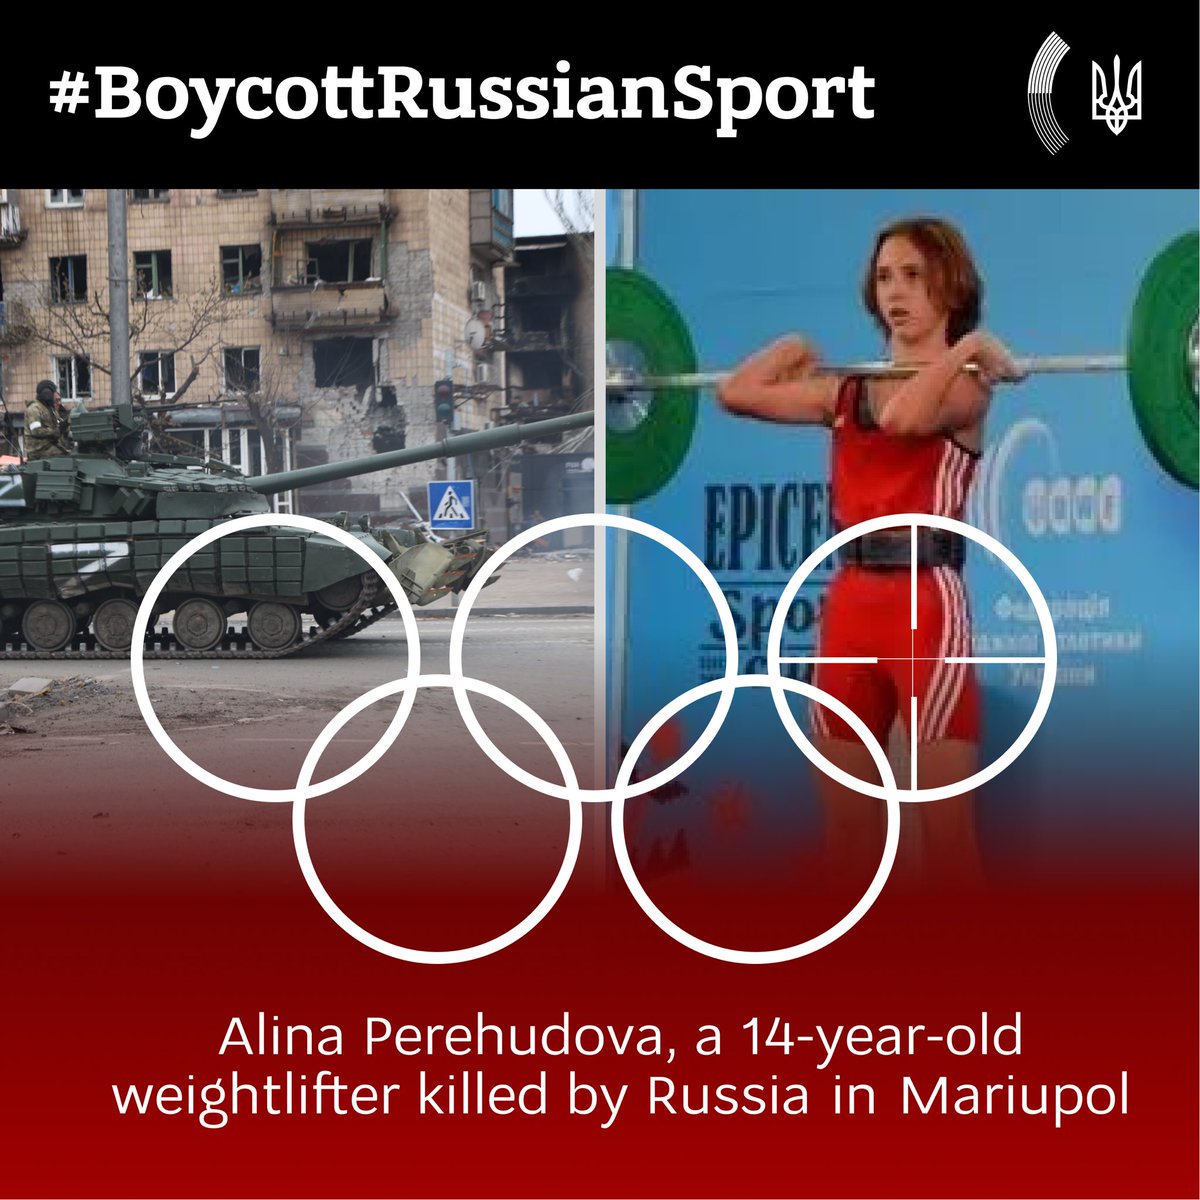 262 #Ukrainian athletes and coaches were killed by Russians during the aggression against  #Ukraine 🇺🇦. Another 16 were wounded, 28 are in captivity, and 6 are still missing. Many Ukrainian athletes will never go to the @olympics, and what about #Russians🇷🇺?

#BoycottRussianSport